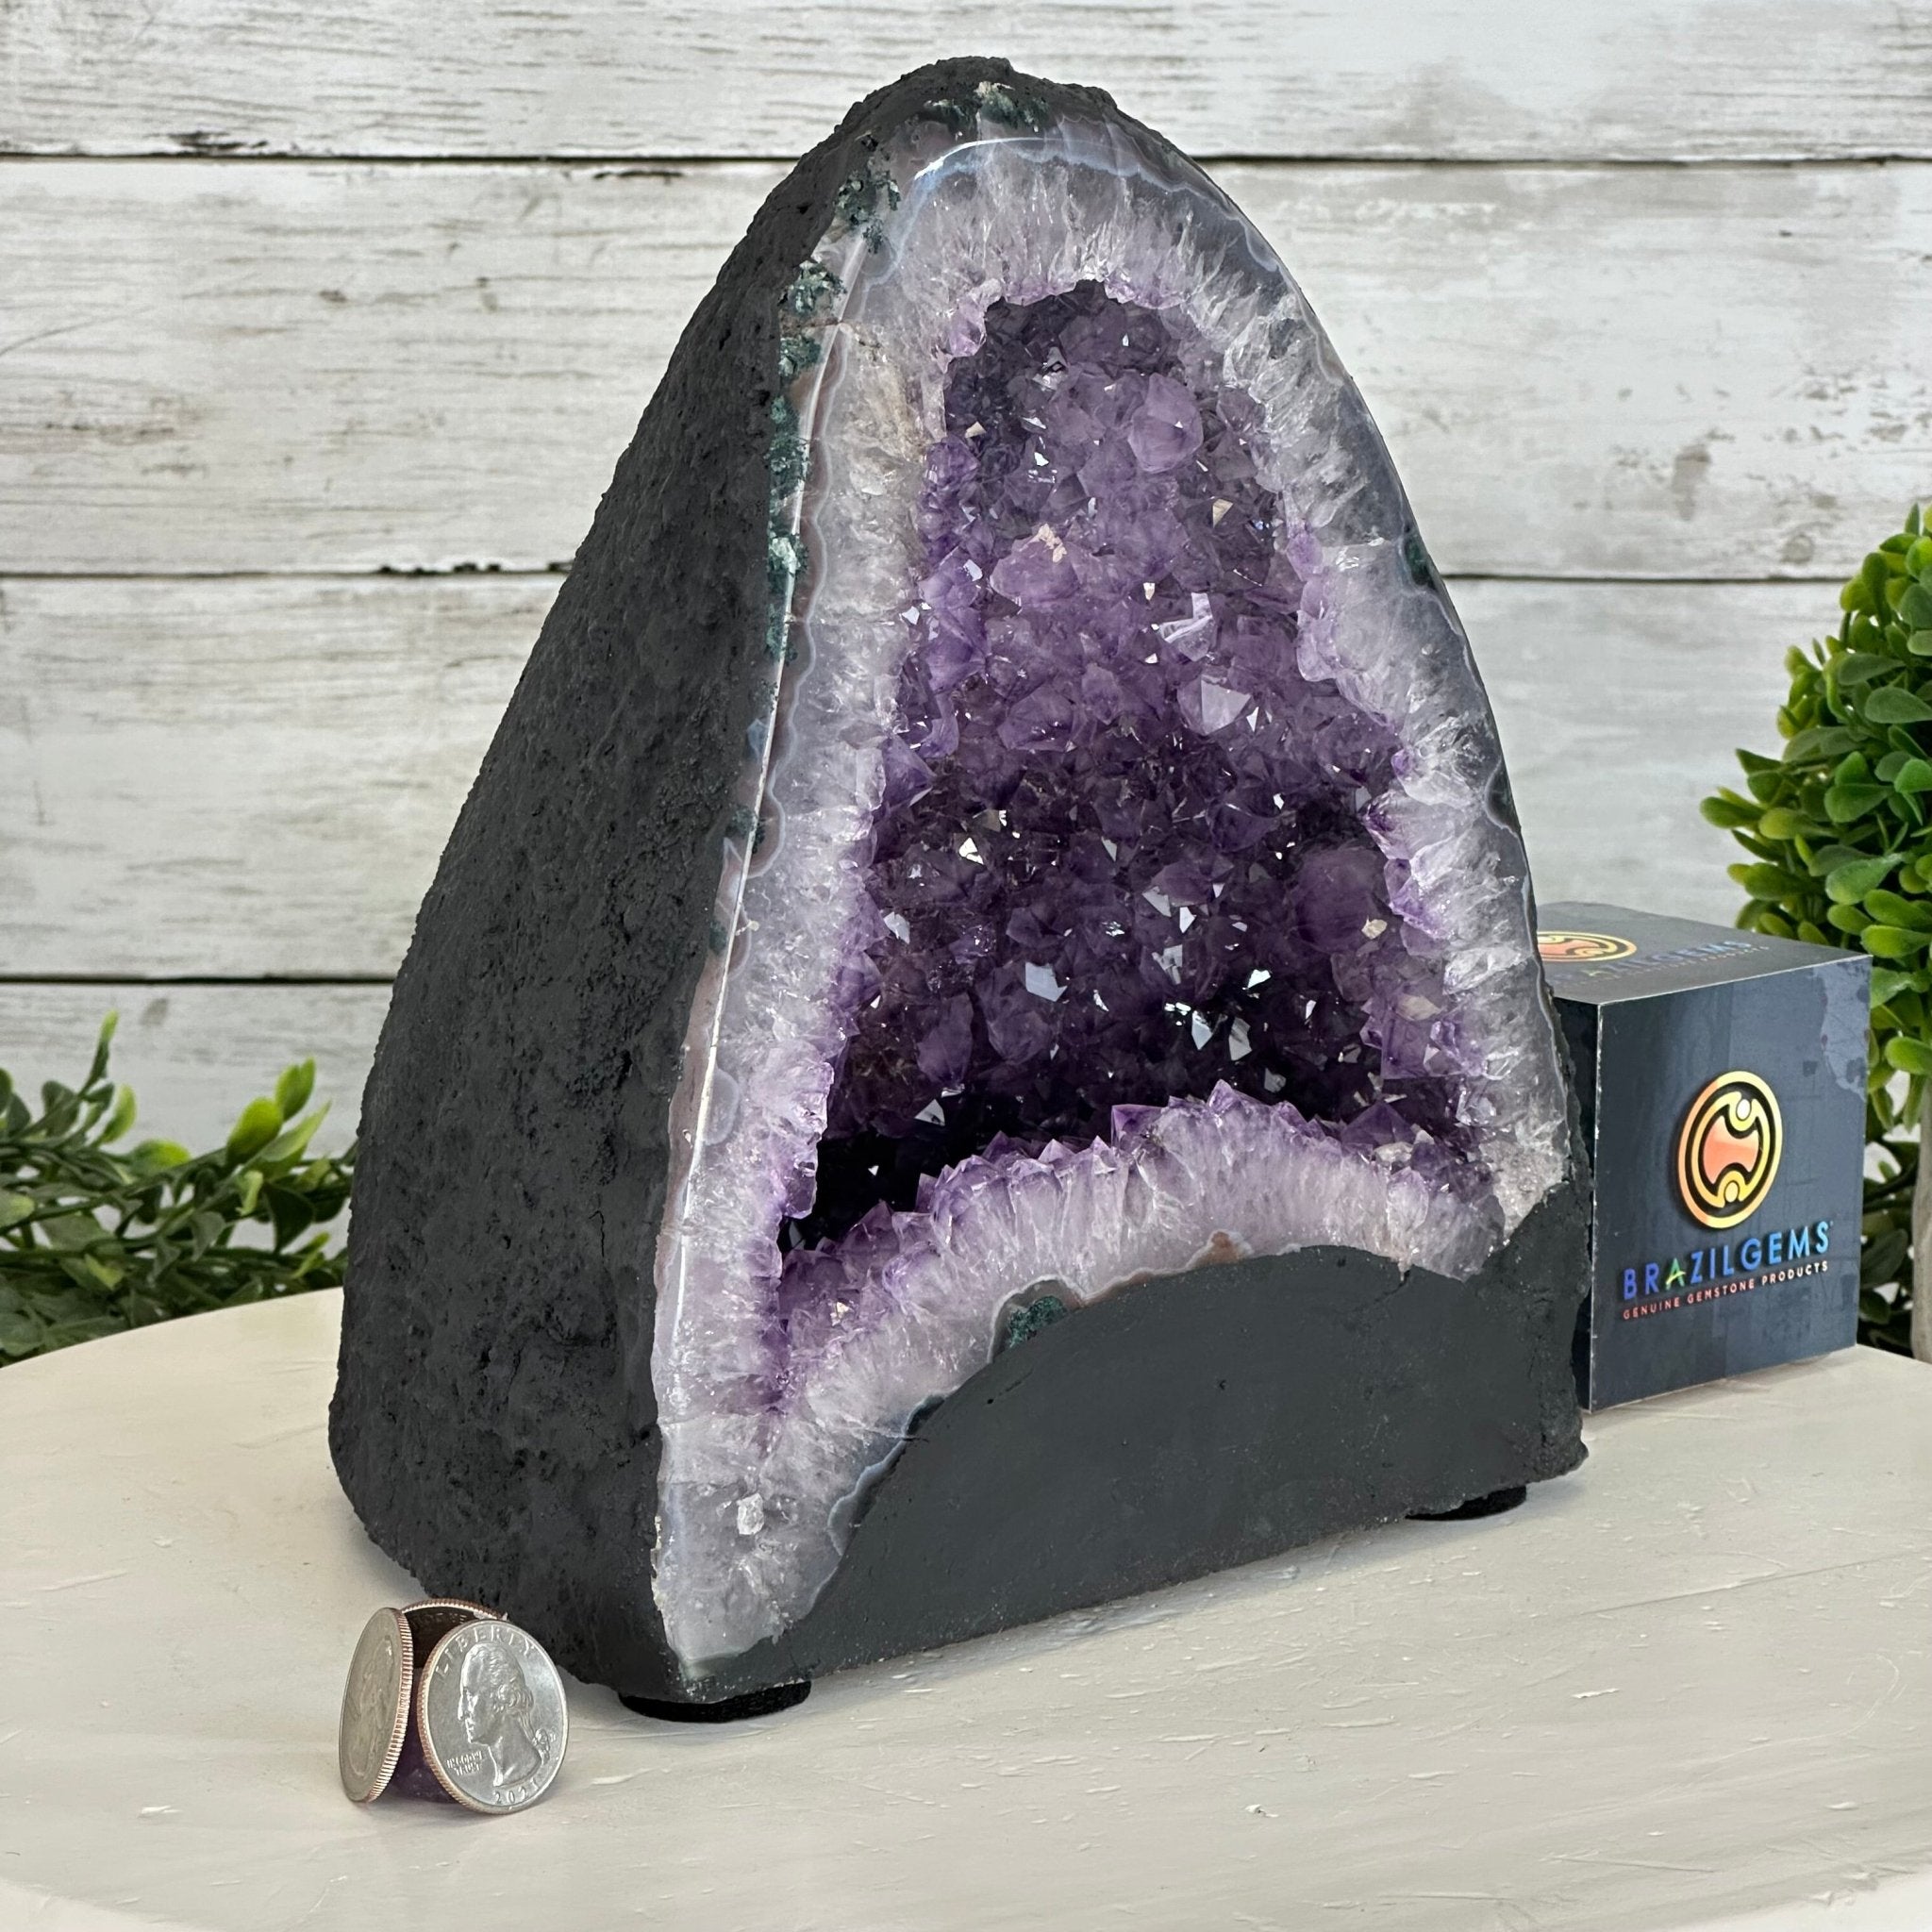 Quality Brazilian Amethyst Cathedral, 11.9 lbs & 8.4" Tall, #5601 - 1357 - Brazil GemsBrazil GemsQuality Brazilian Amethyst Cathedral, 11.9 lbs & 8.4" Tall, #5601 - 1357Cathedrals5601 - 1357